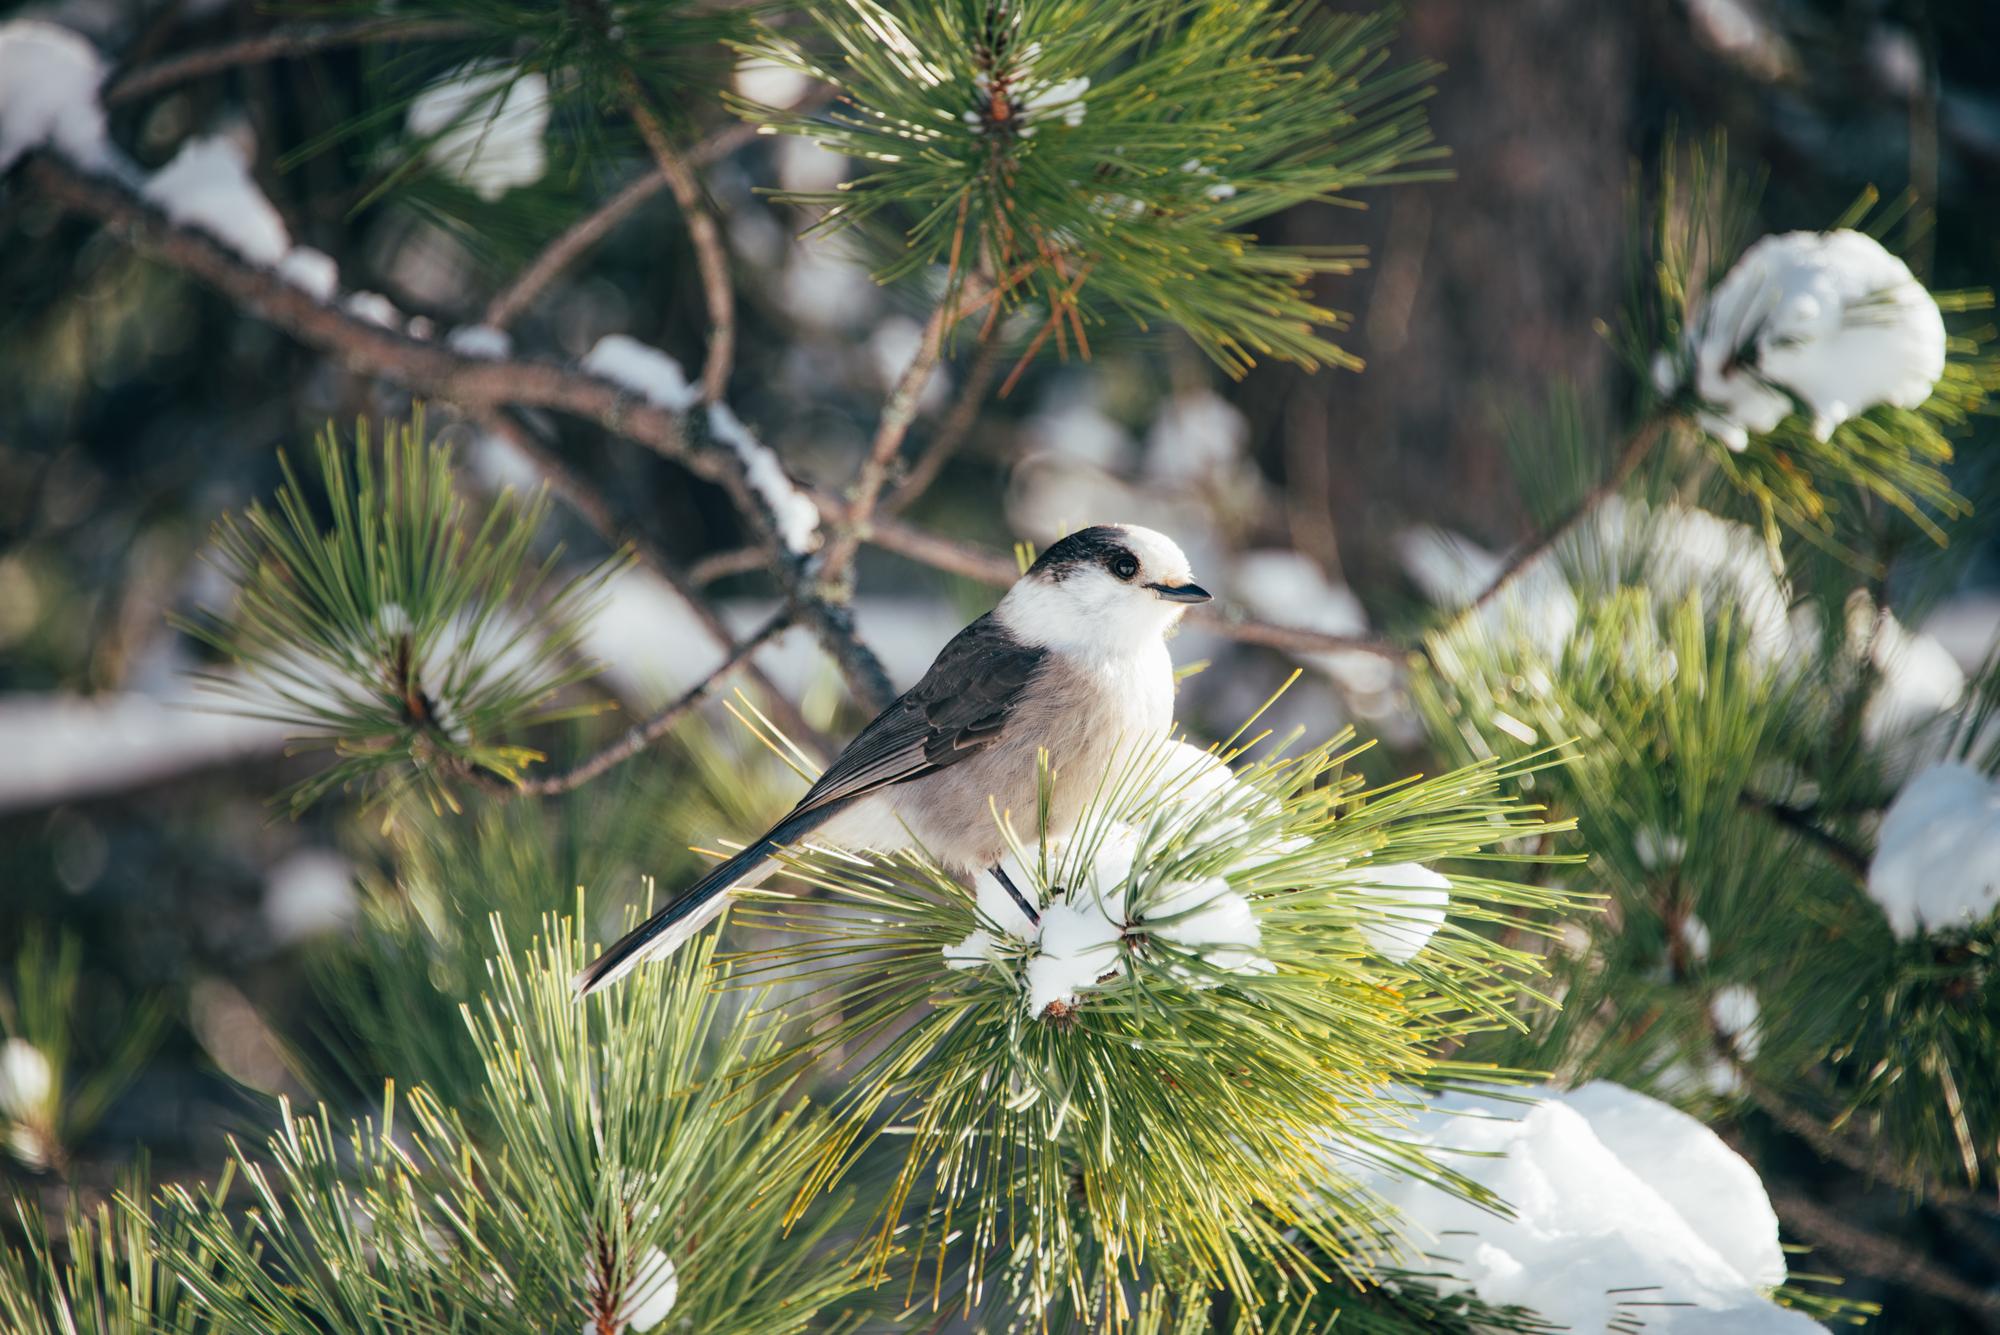 Cute little gray jay bird perched on a snowy spruce branch